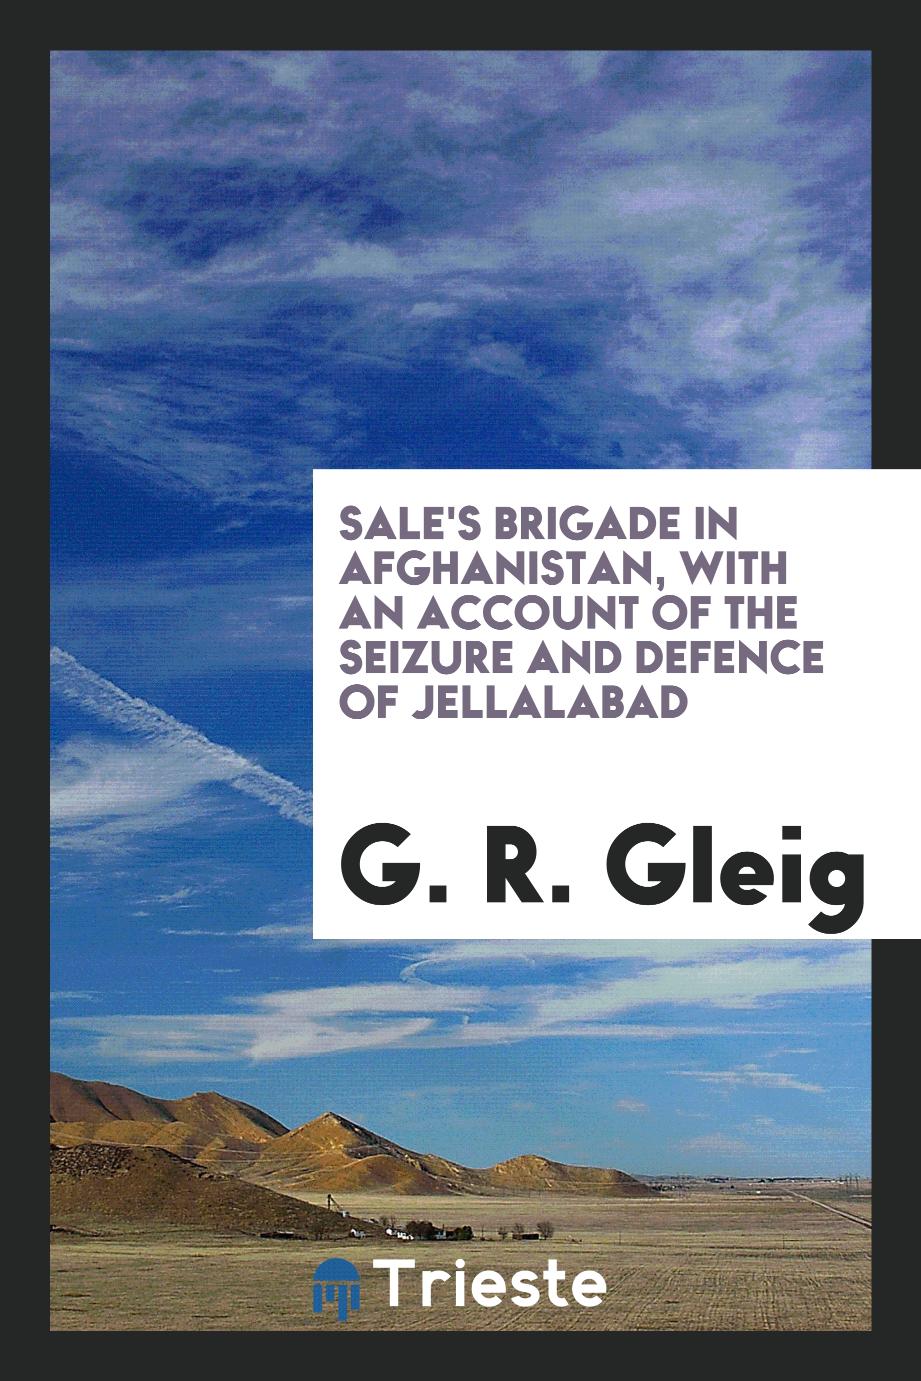 G. R. Gleig - Sale's brigade in Afghanistan, with an account of the seizure and defence of Jellalabad